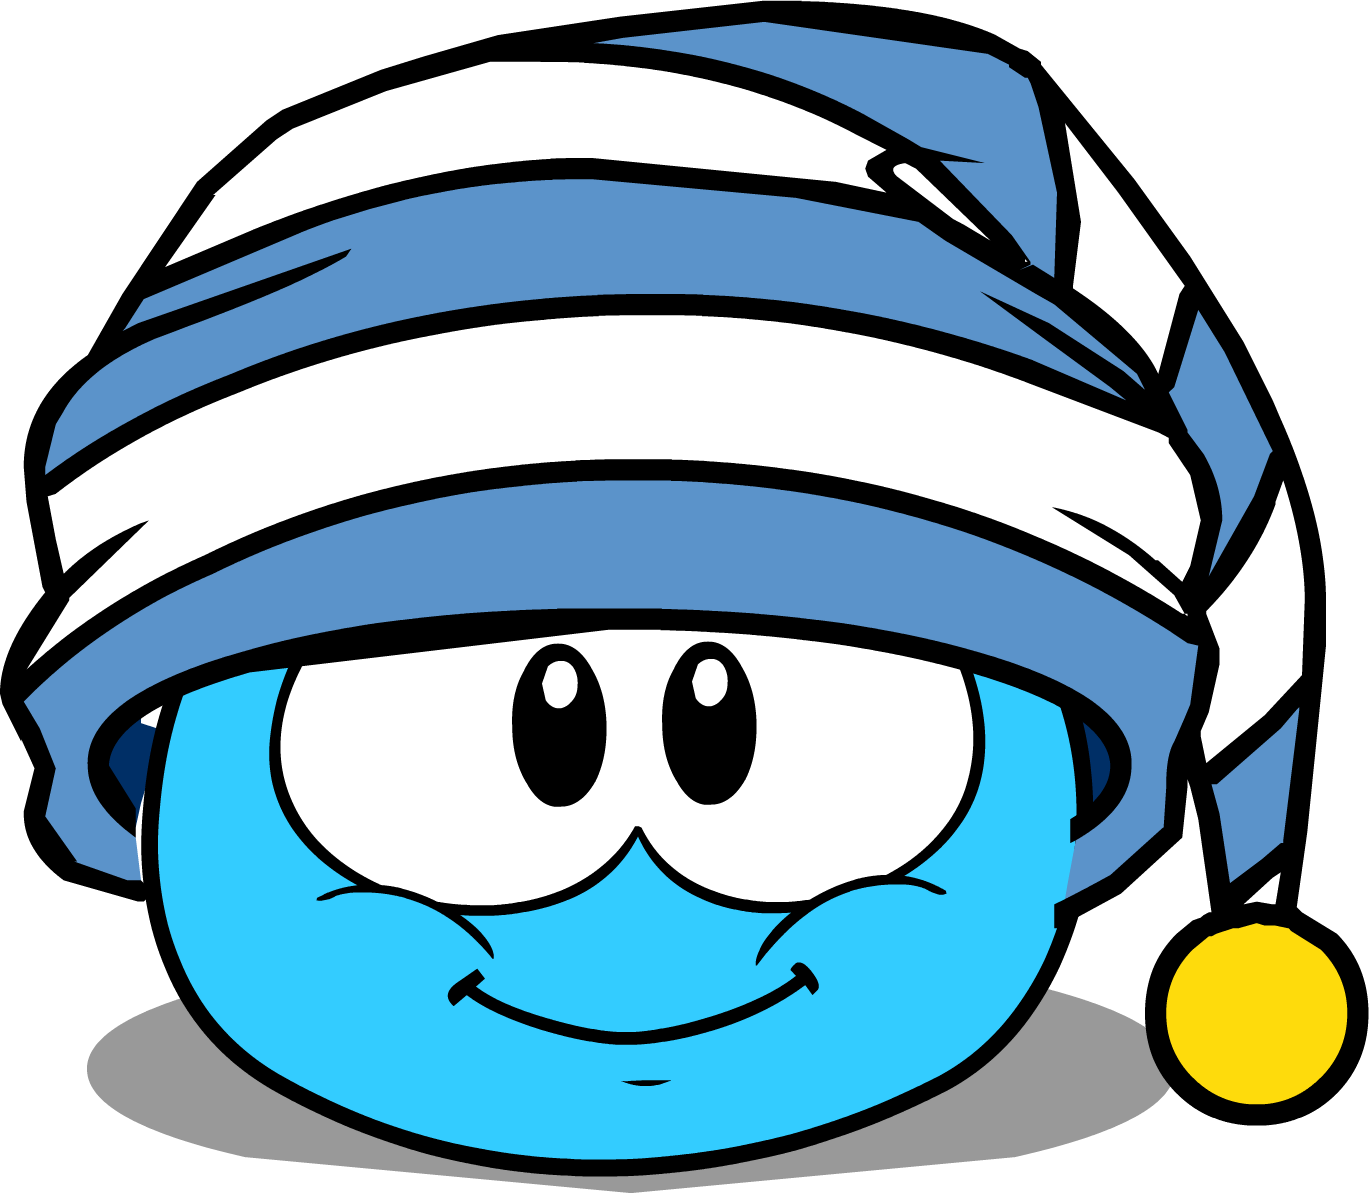 So Let's Start With The Nightly Glass Of Wine - Club Penguin Puffle Hats (1369x1193)